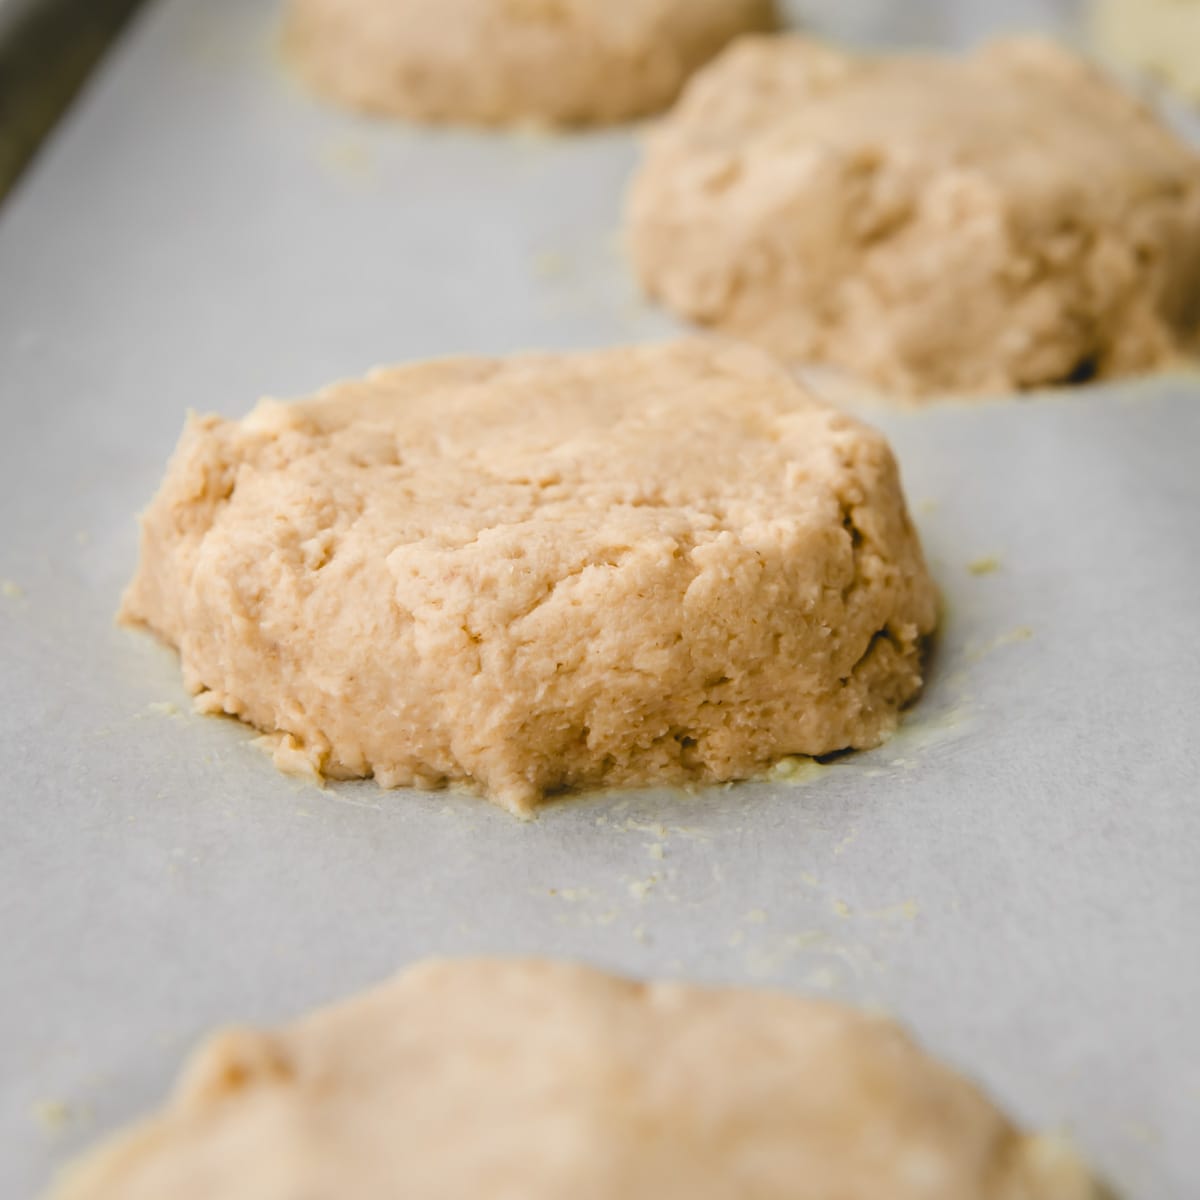 raw biscuit dough on a baking sheet before baking